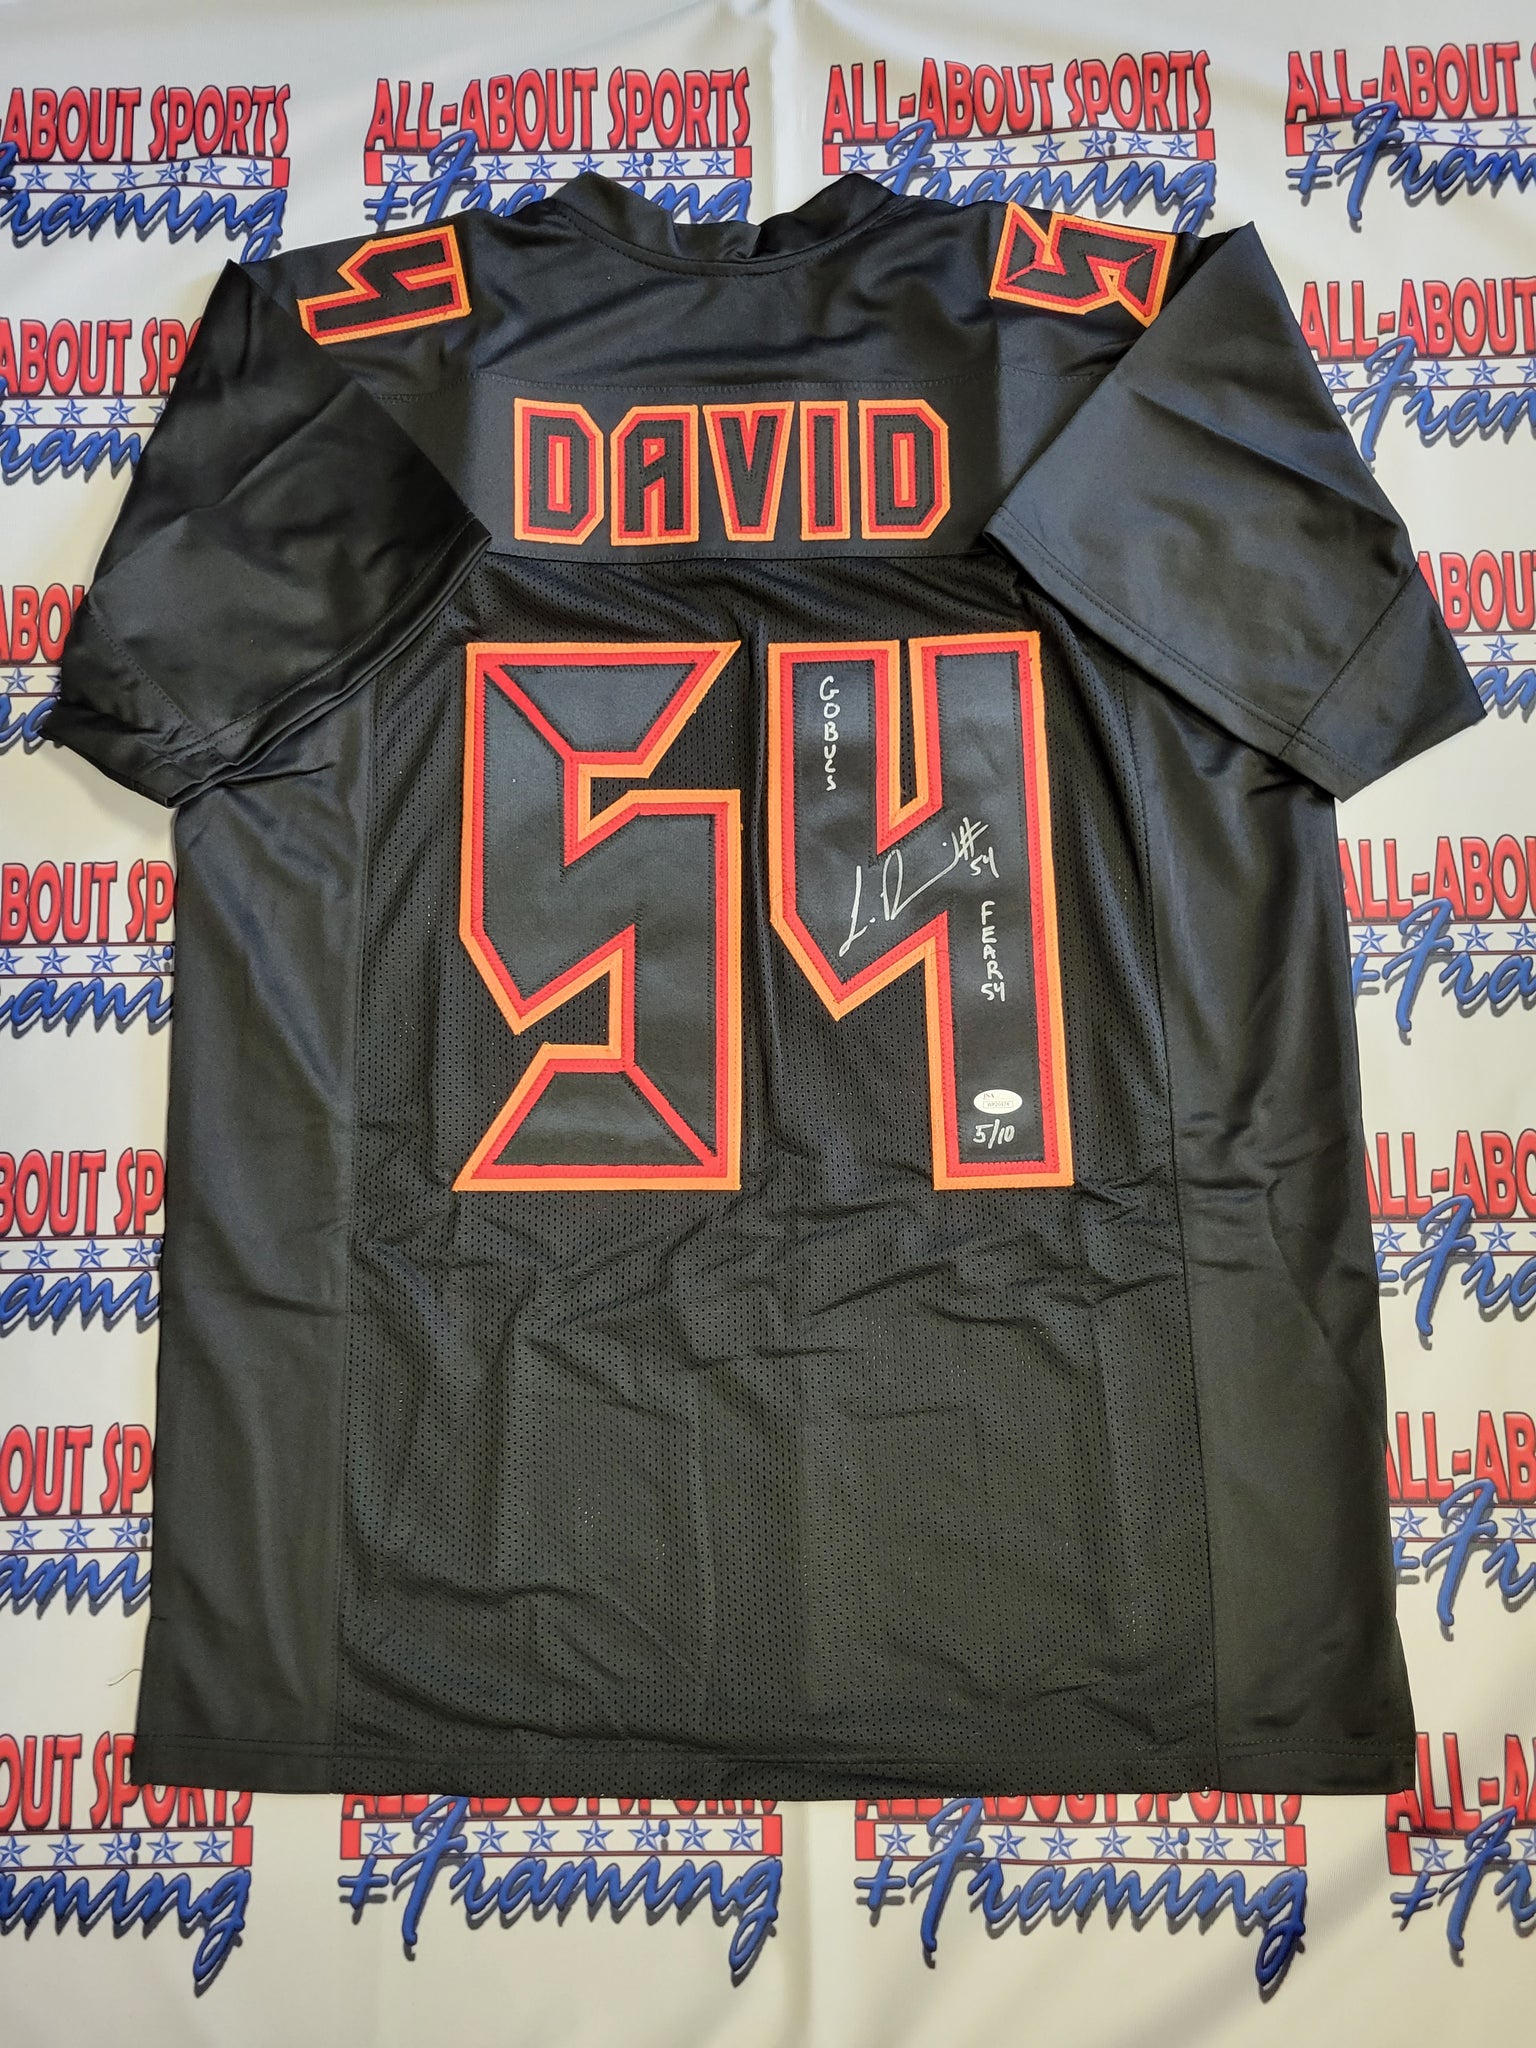 LaVonte David Authentic Signed Pro Style Jersey Autographed & Inscribed  JSA